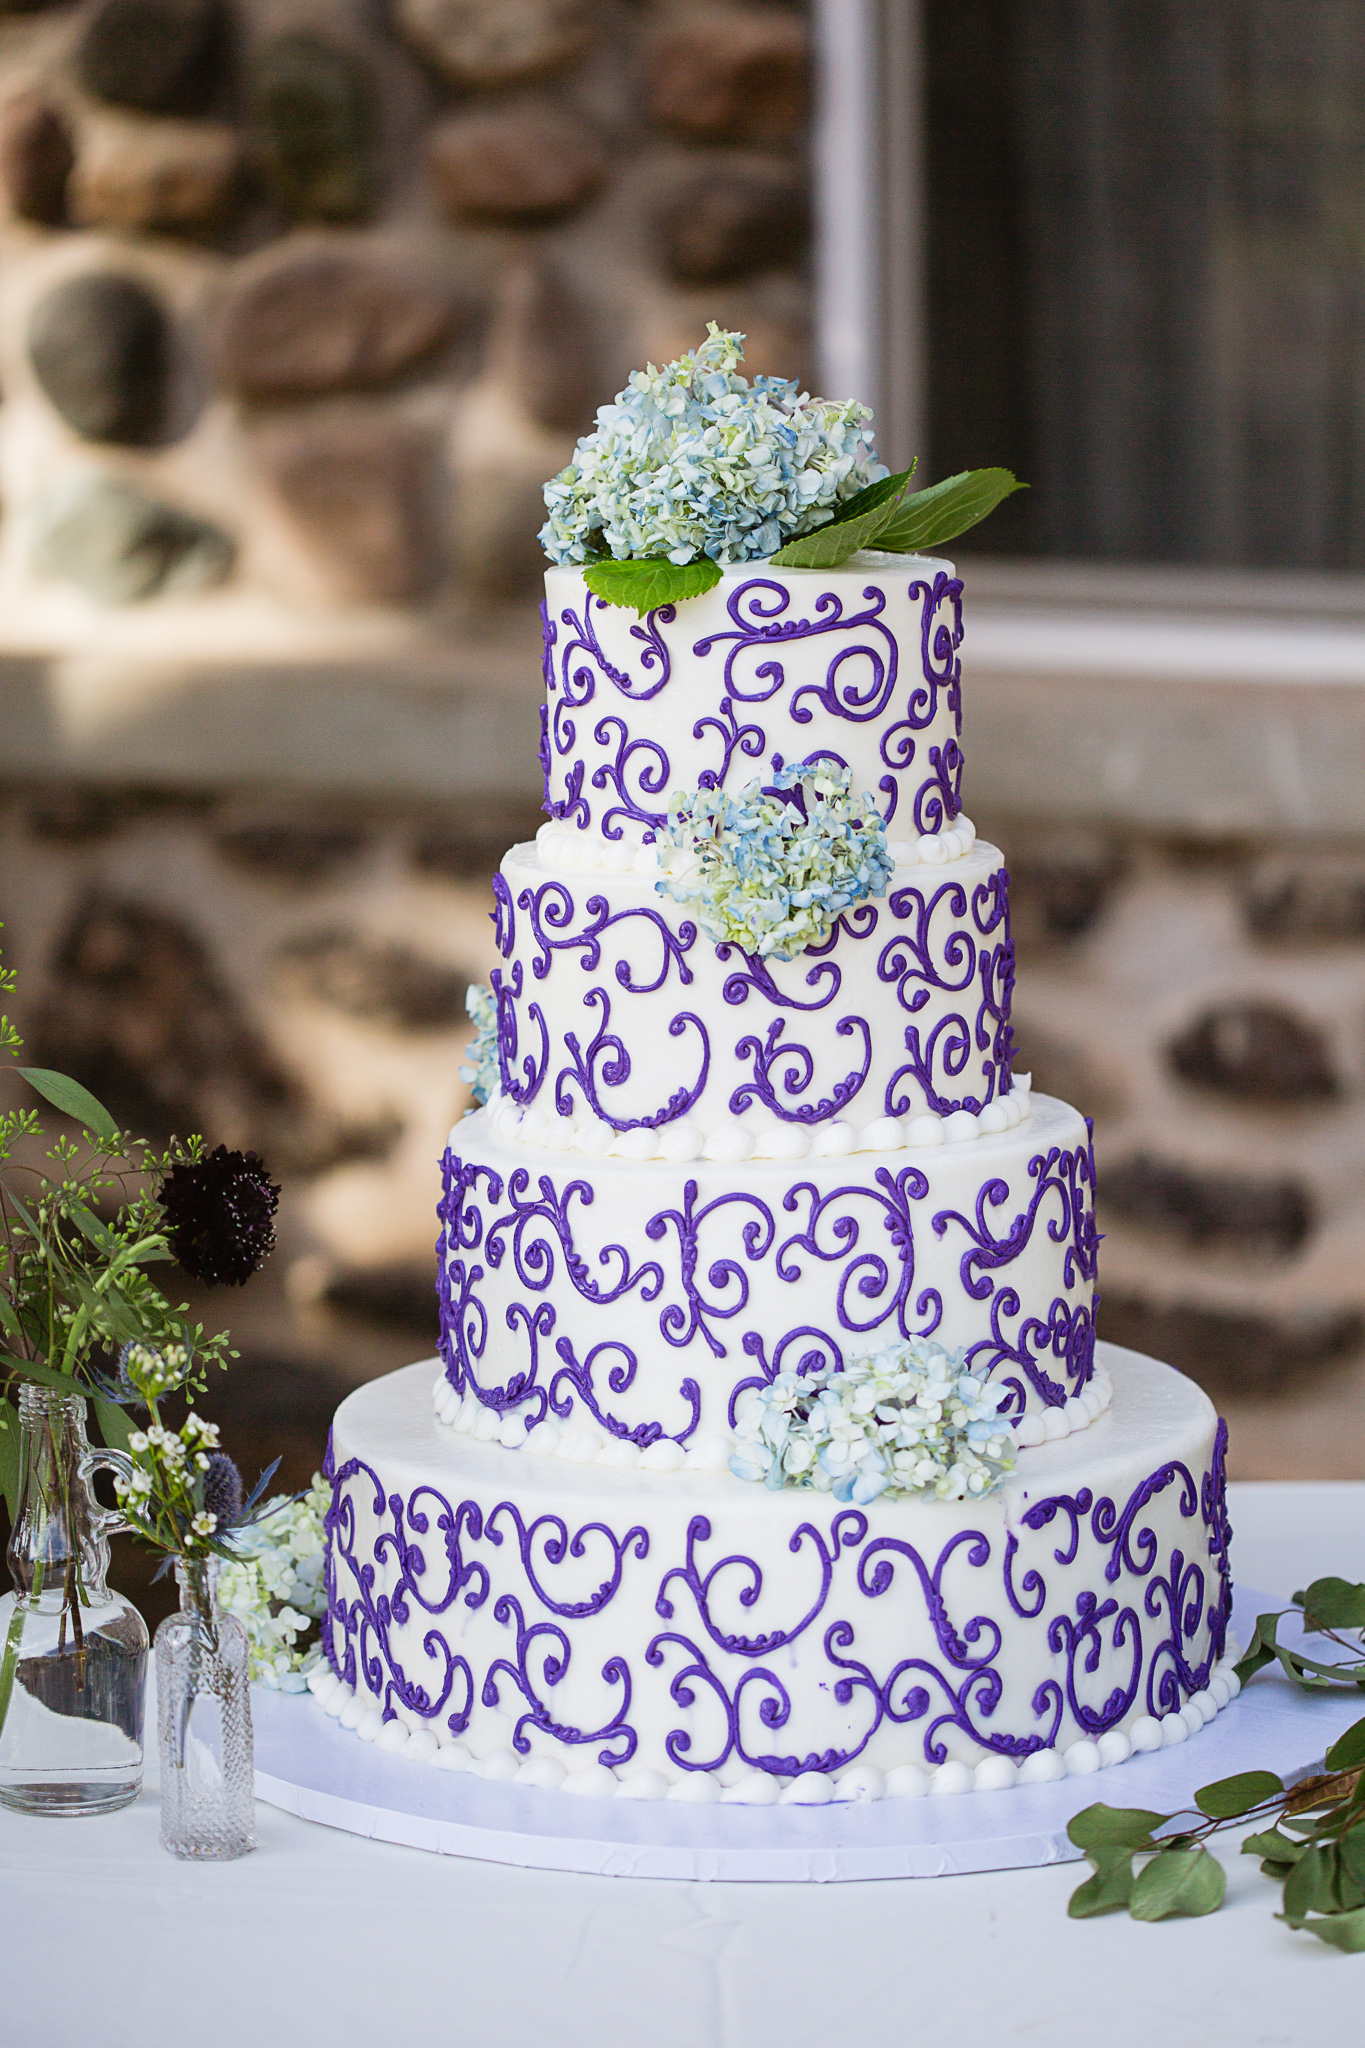 White and purple wedding cake decorated with blue hydrangea by PMA Photography.